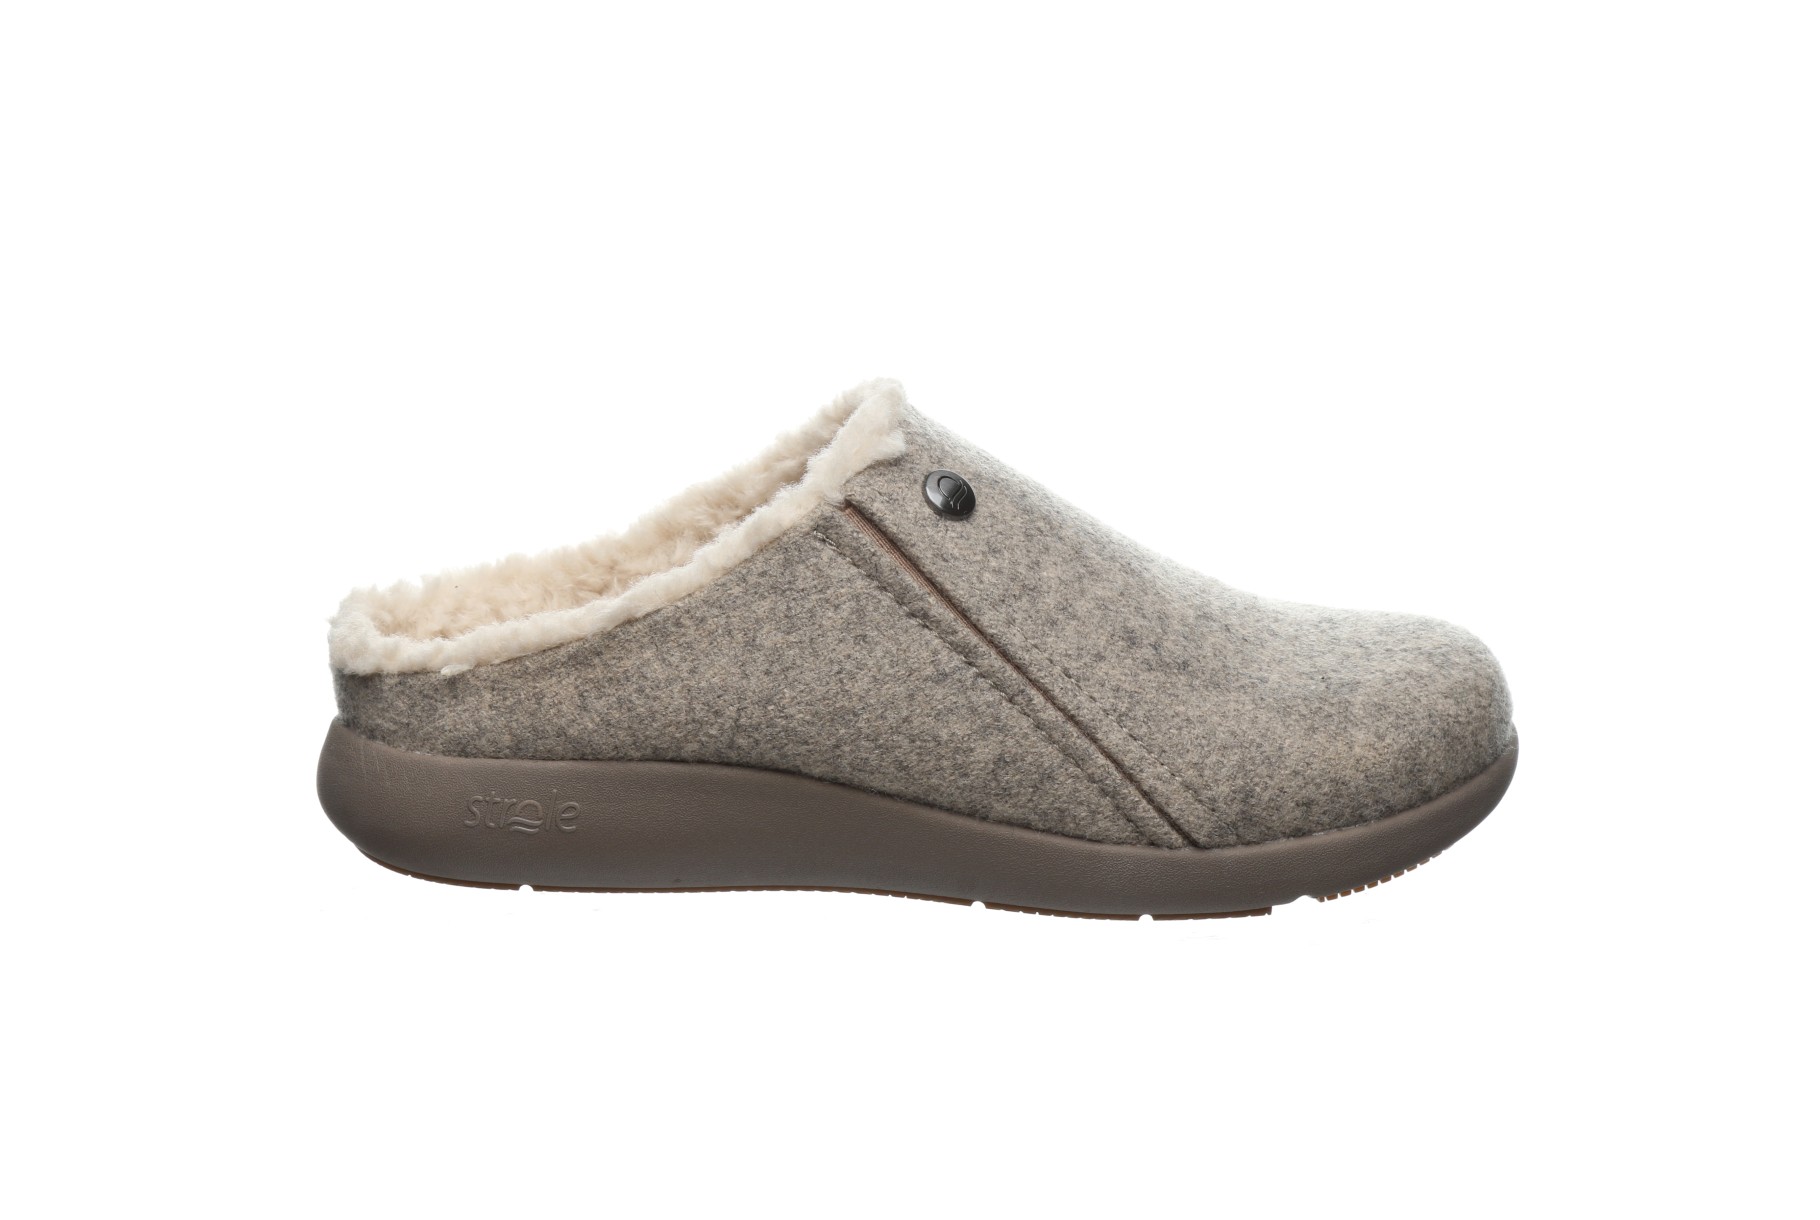 Strole Snug Women's Supportive Wool Clog with Orthotic Arch Support ...